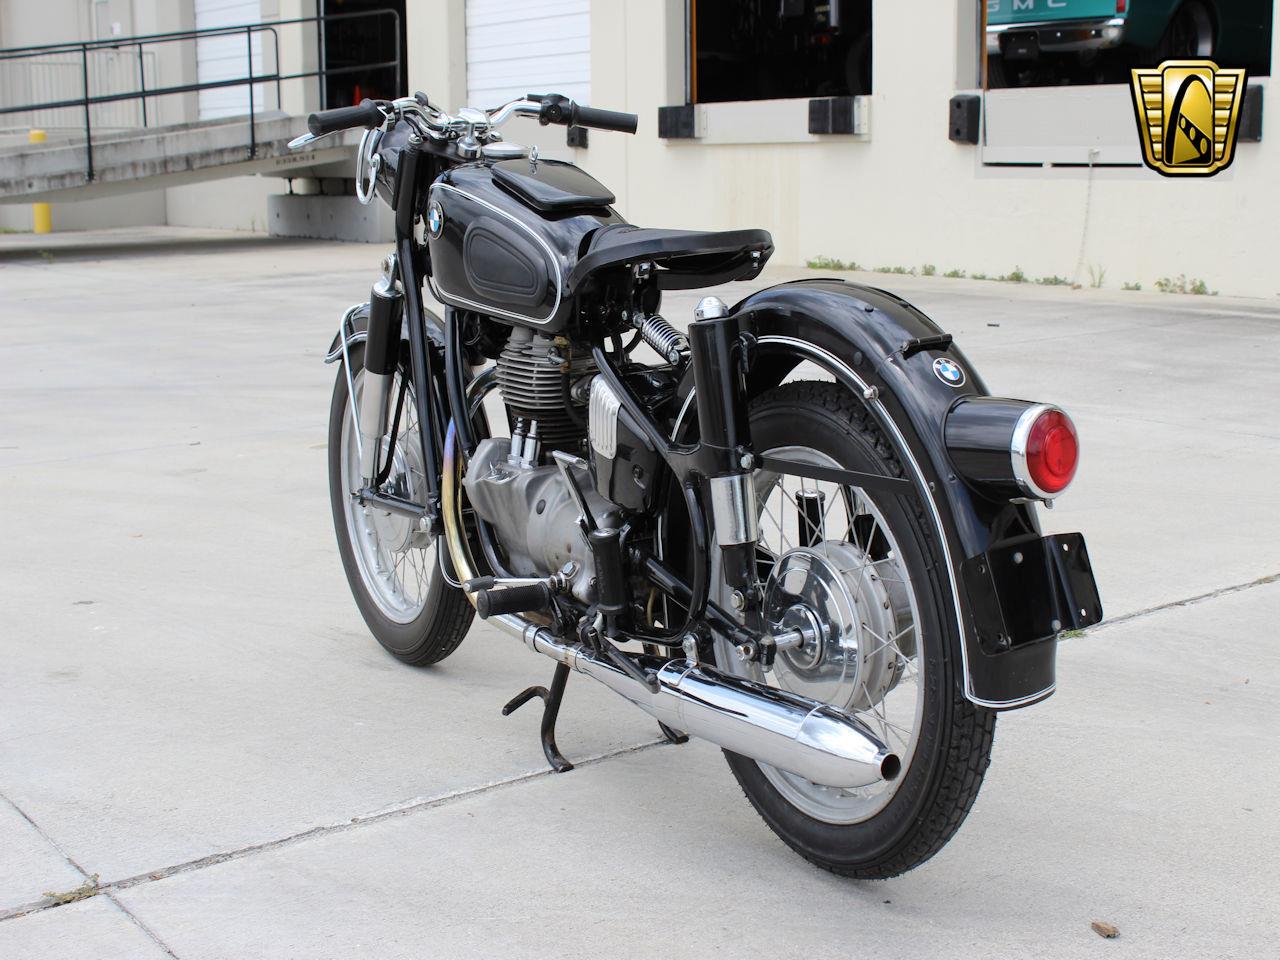 1959 BMW Motorcycle for Sale | ClassicCars.com | CC-1105212